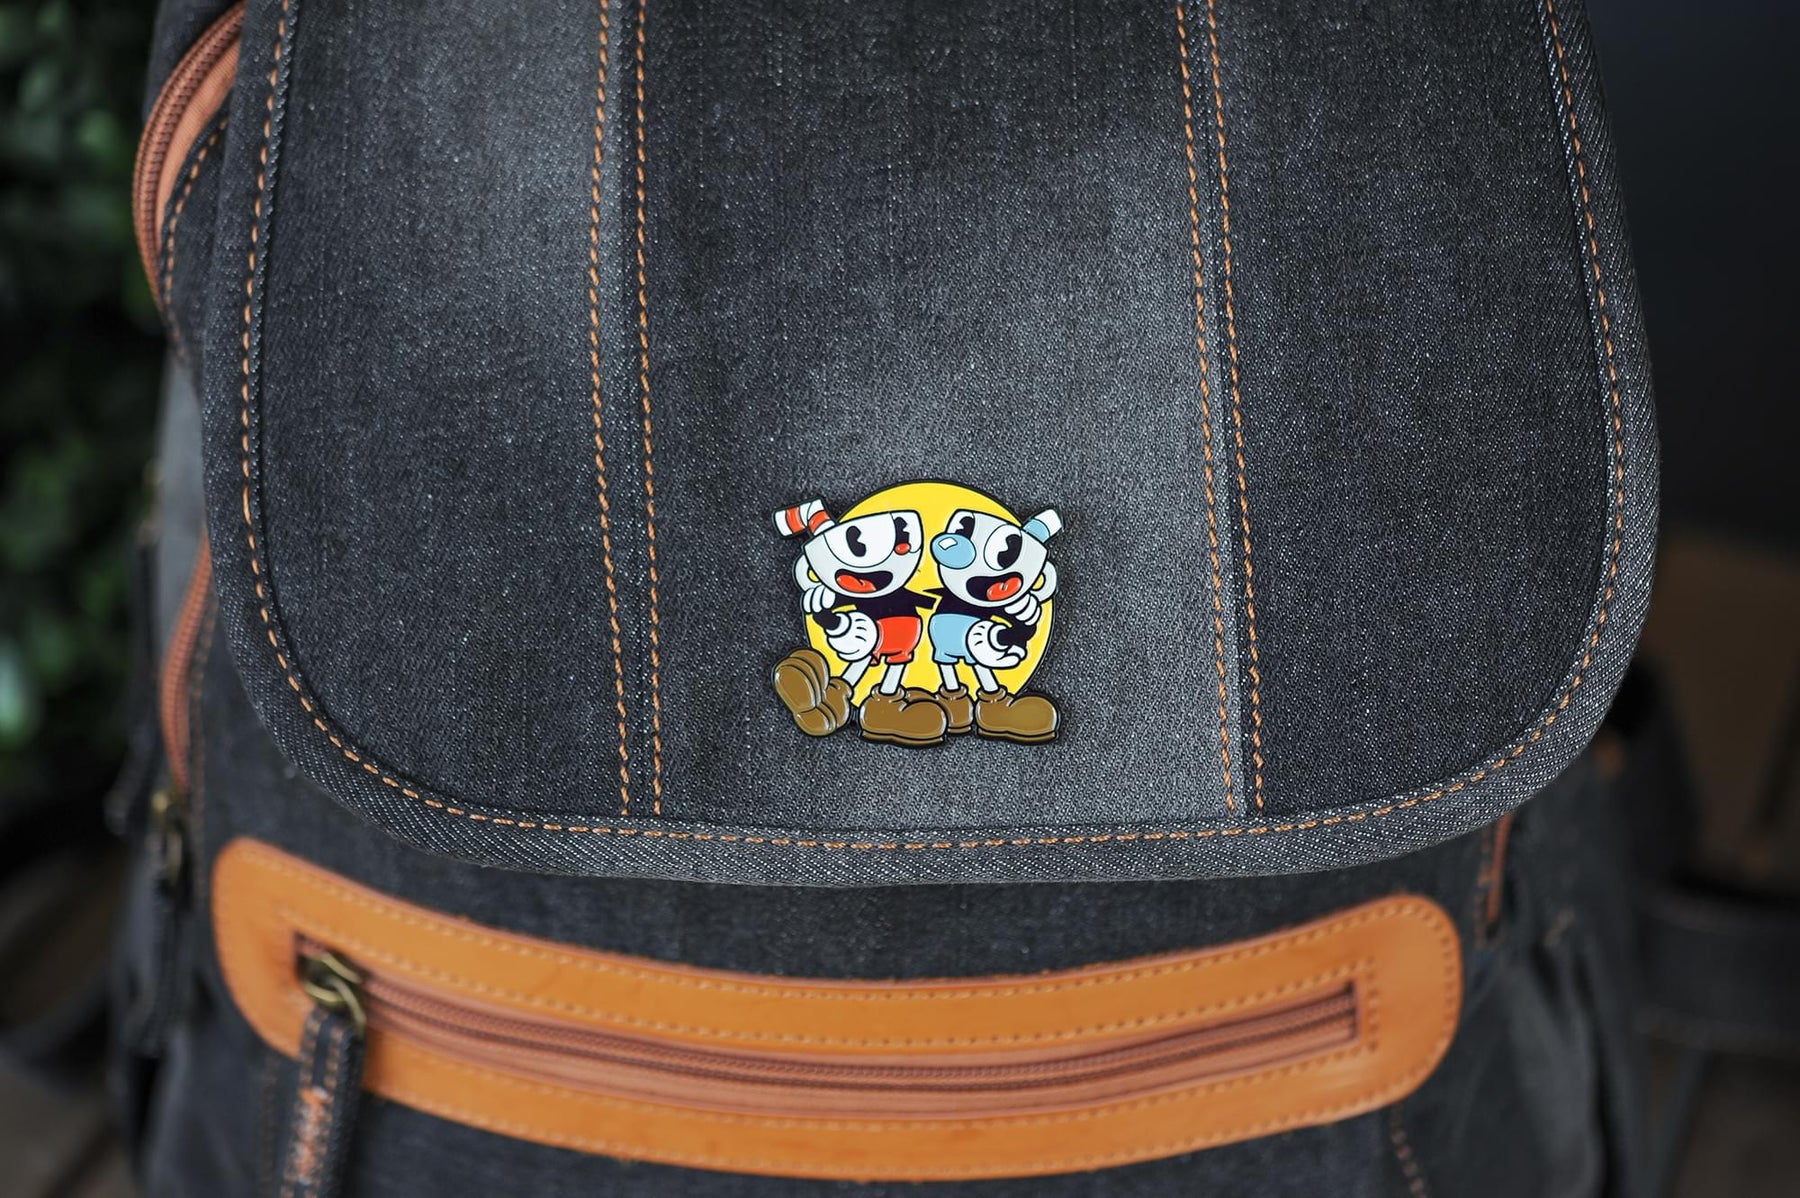 Cuphead & Mugman Pin | Official Cuphead Collectible Pin | Measures 2 Inches